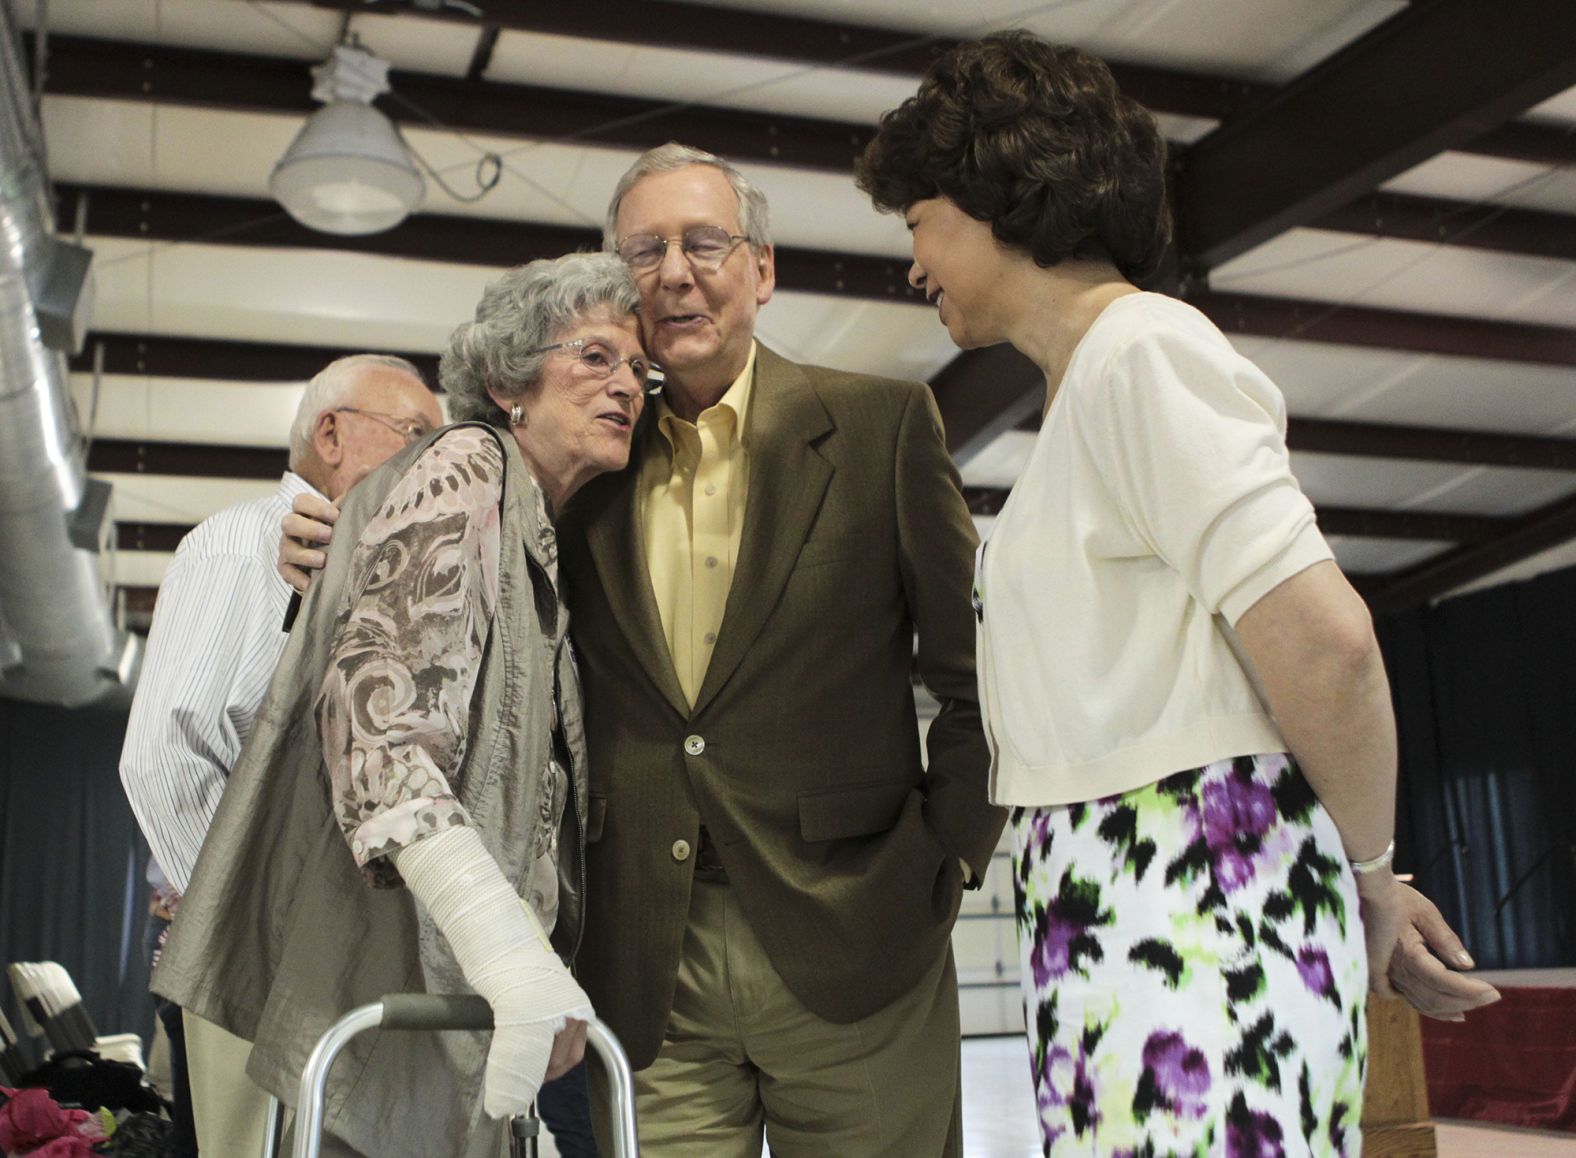 McConnell hugs Betty Lou Weddle, 82, after  speaking to a small audience in Liberty, Kentucky, in May 2014.